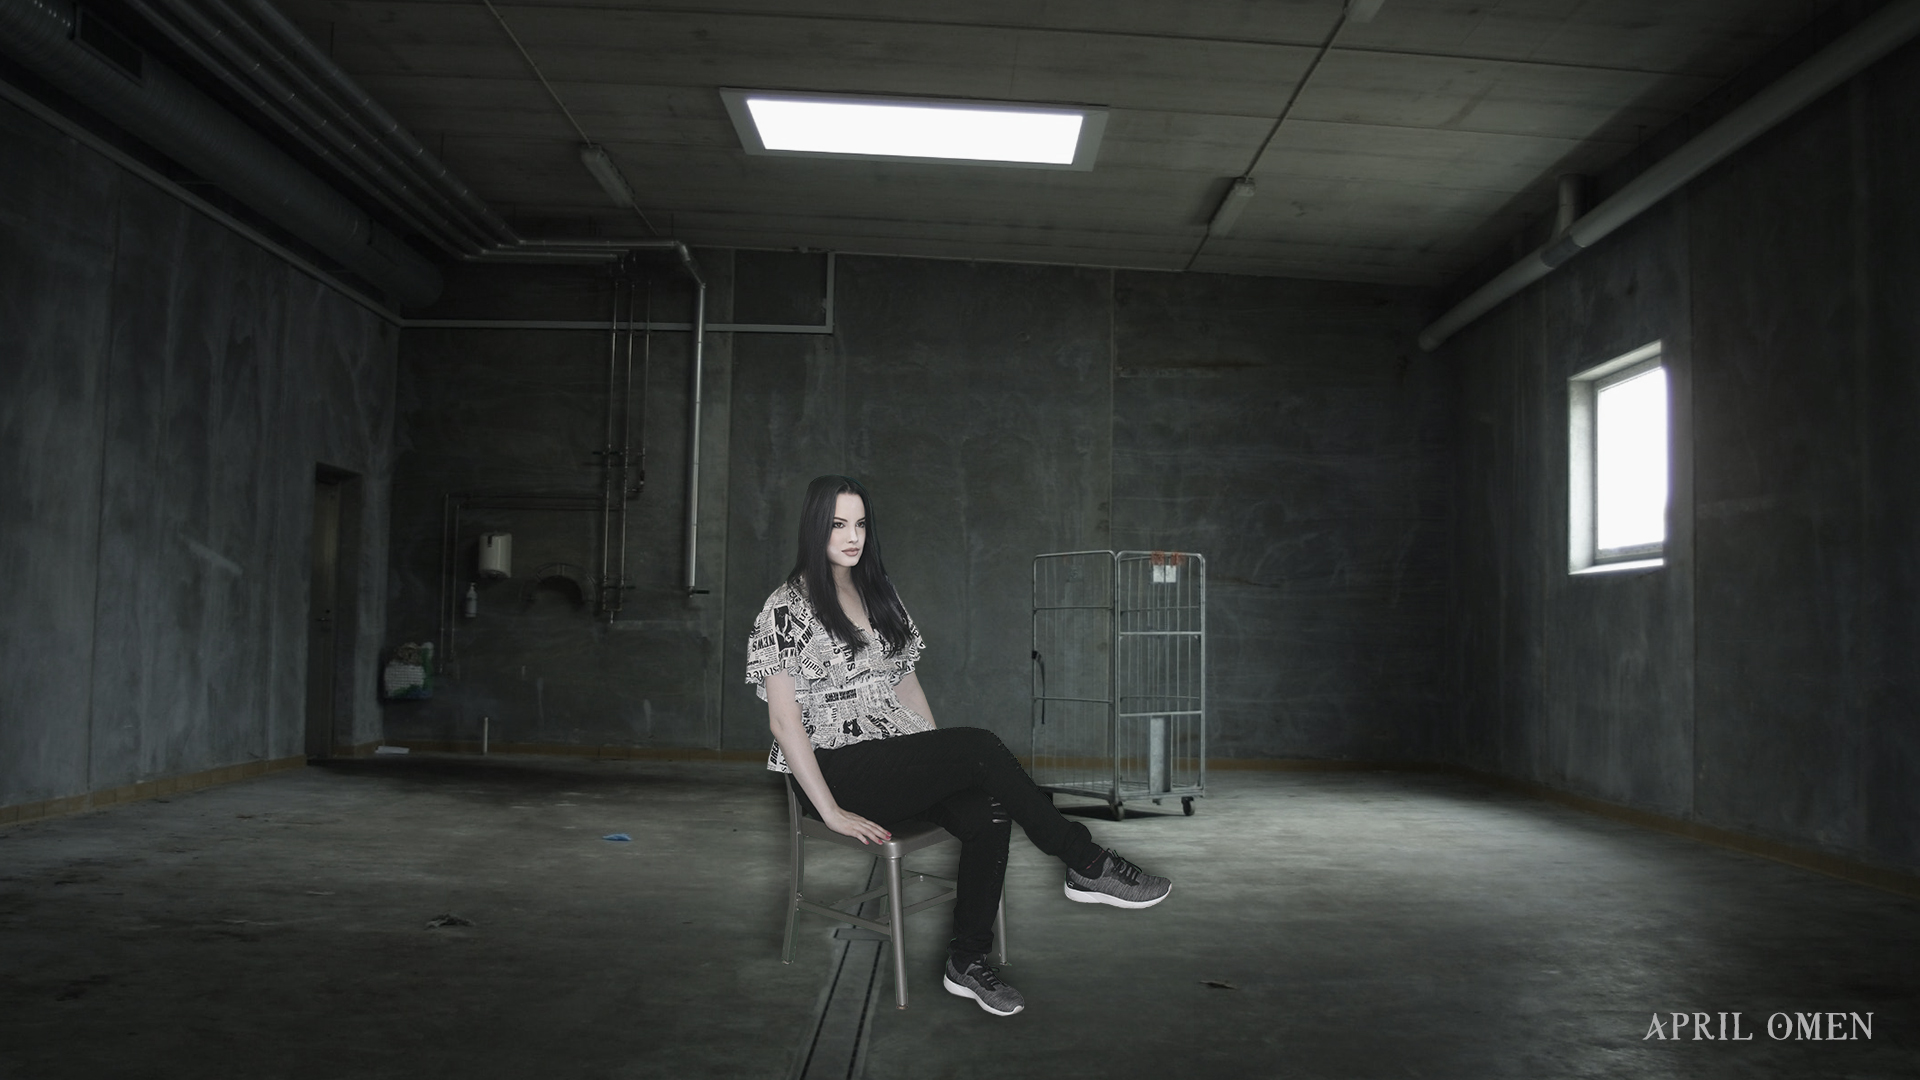 April Omen is sitting in a chair inside a warehouse